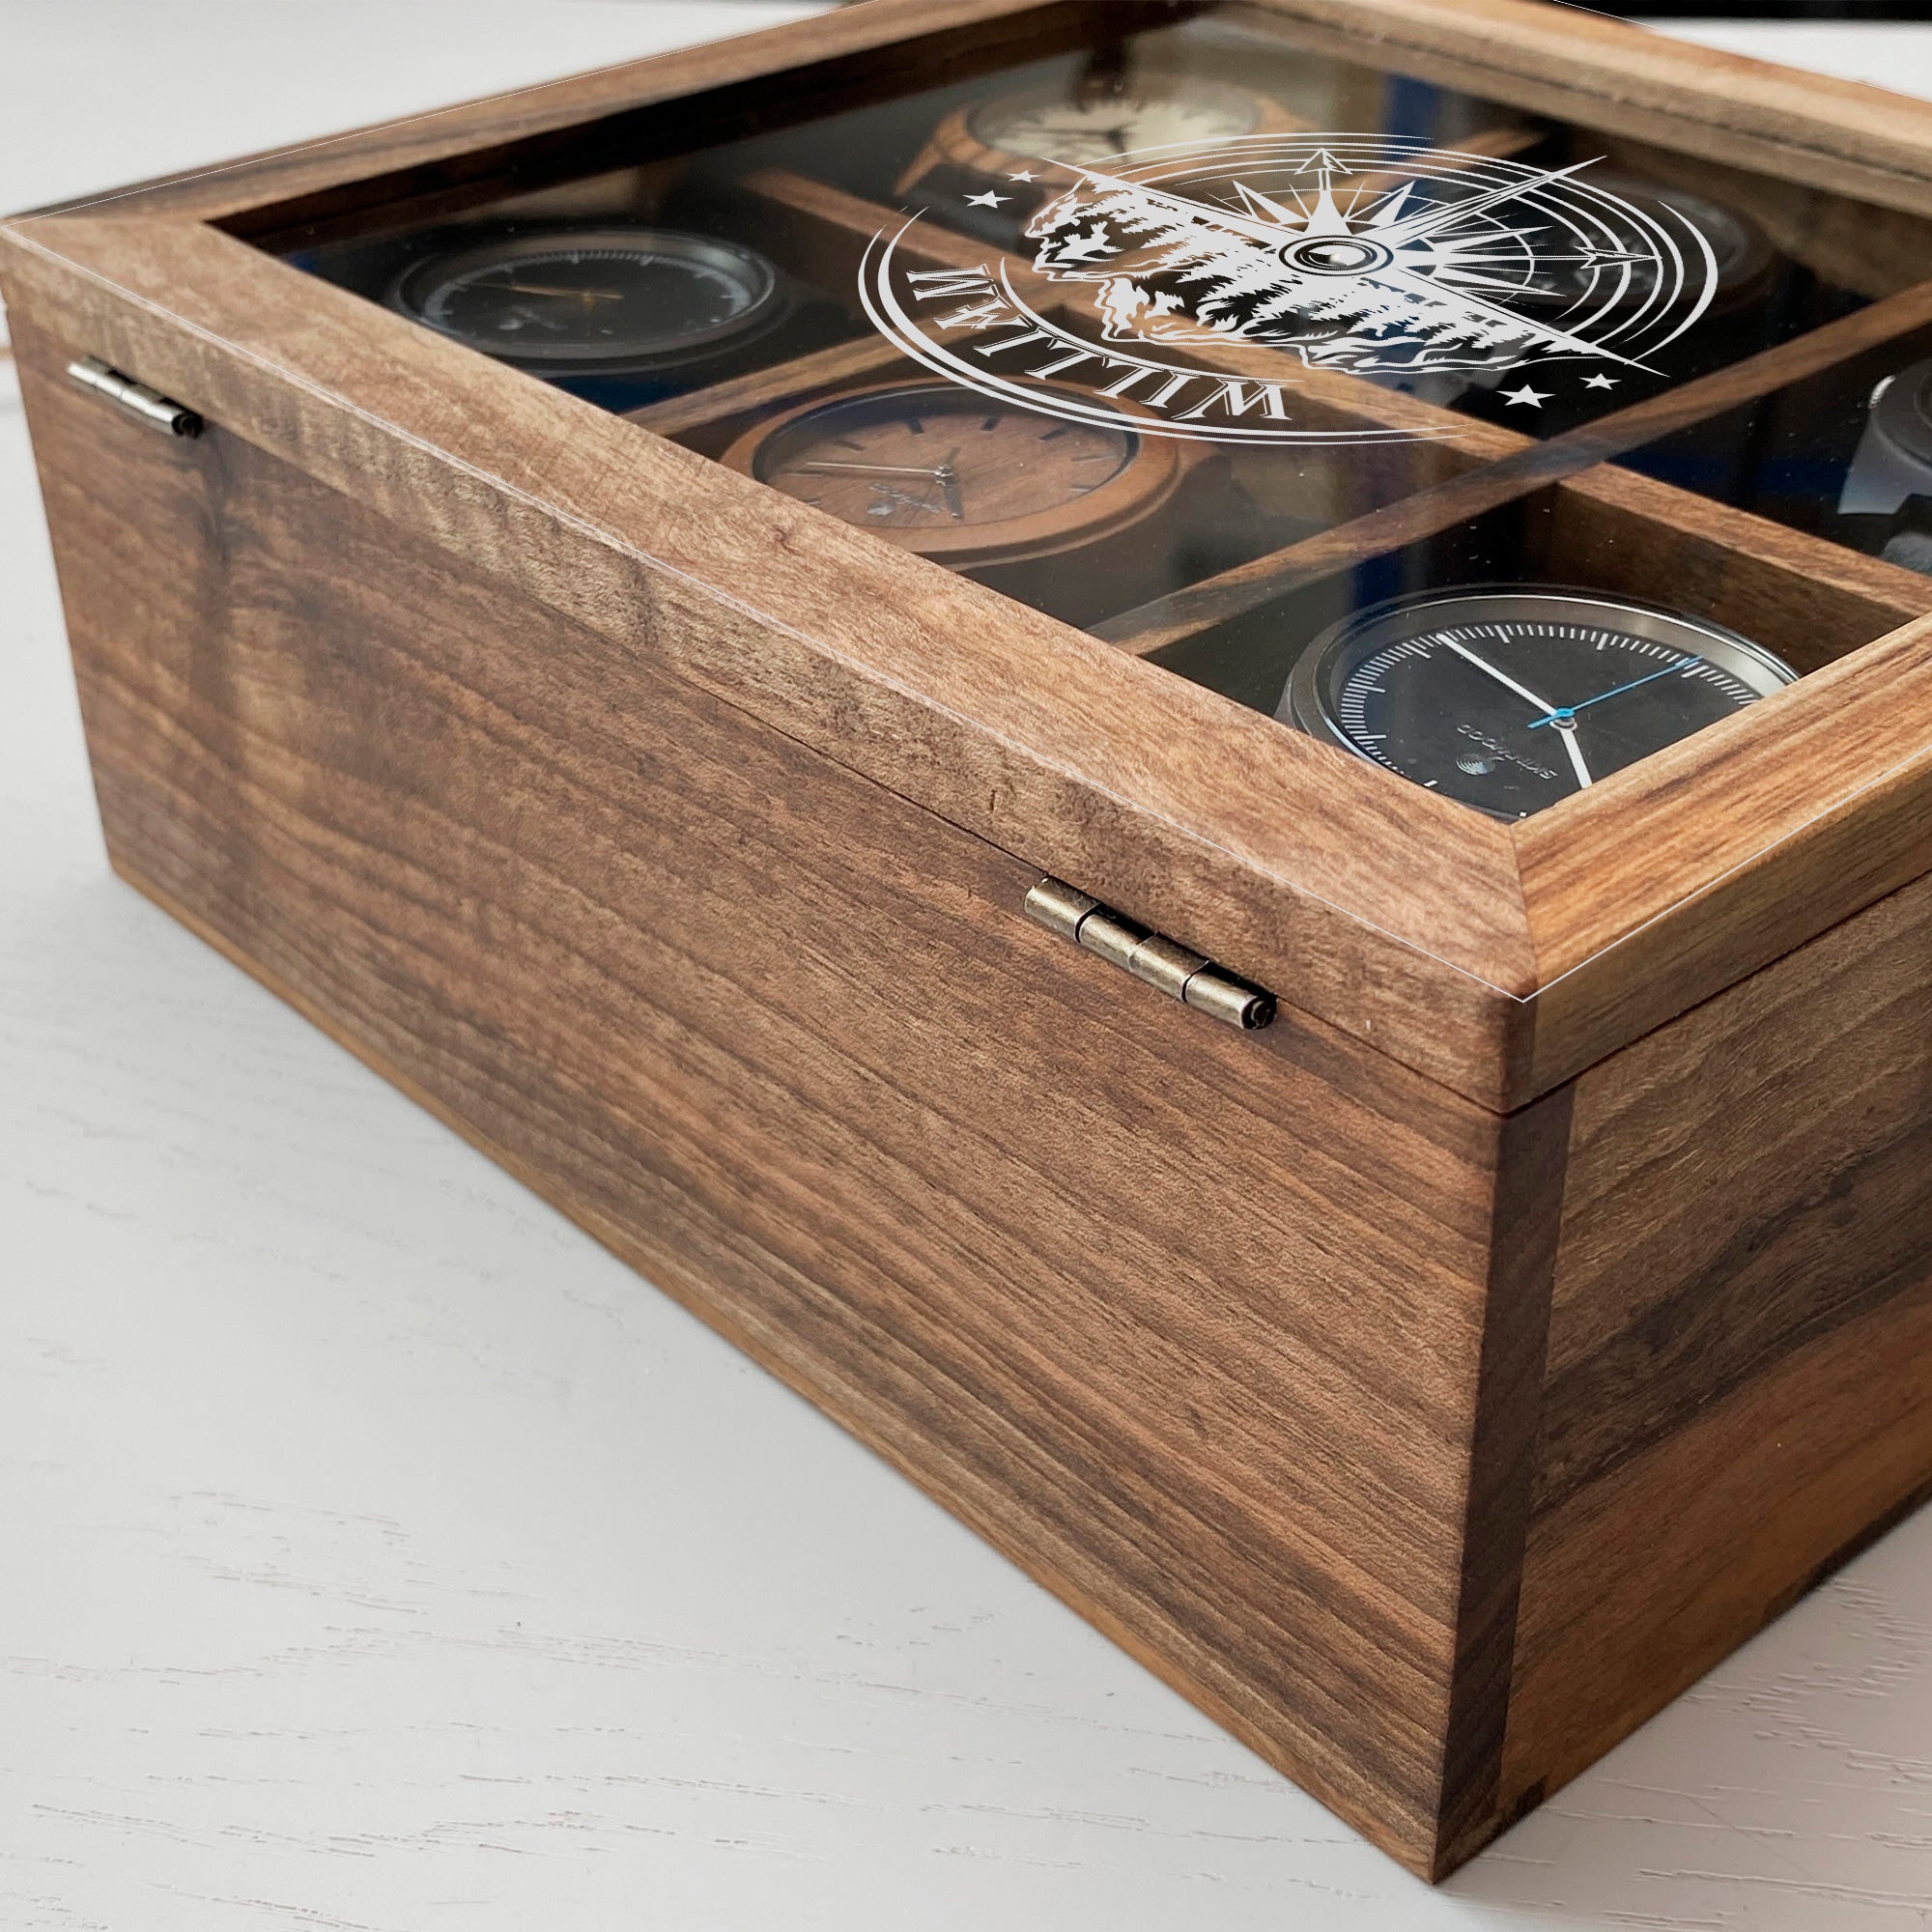 Watch Box by SkinWood - 6 Watches